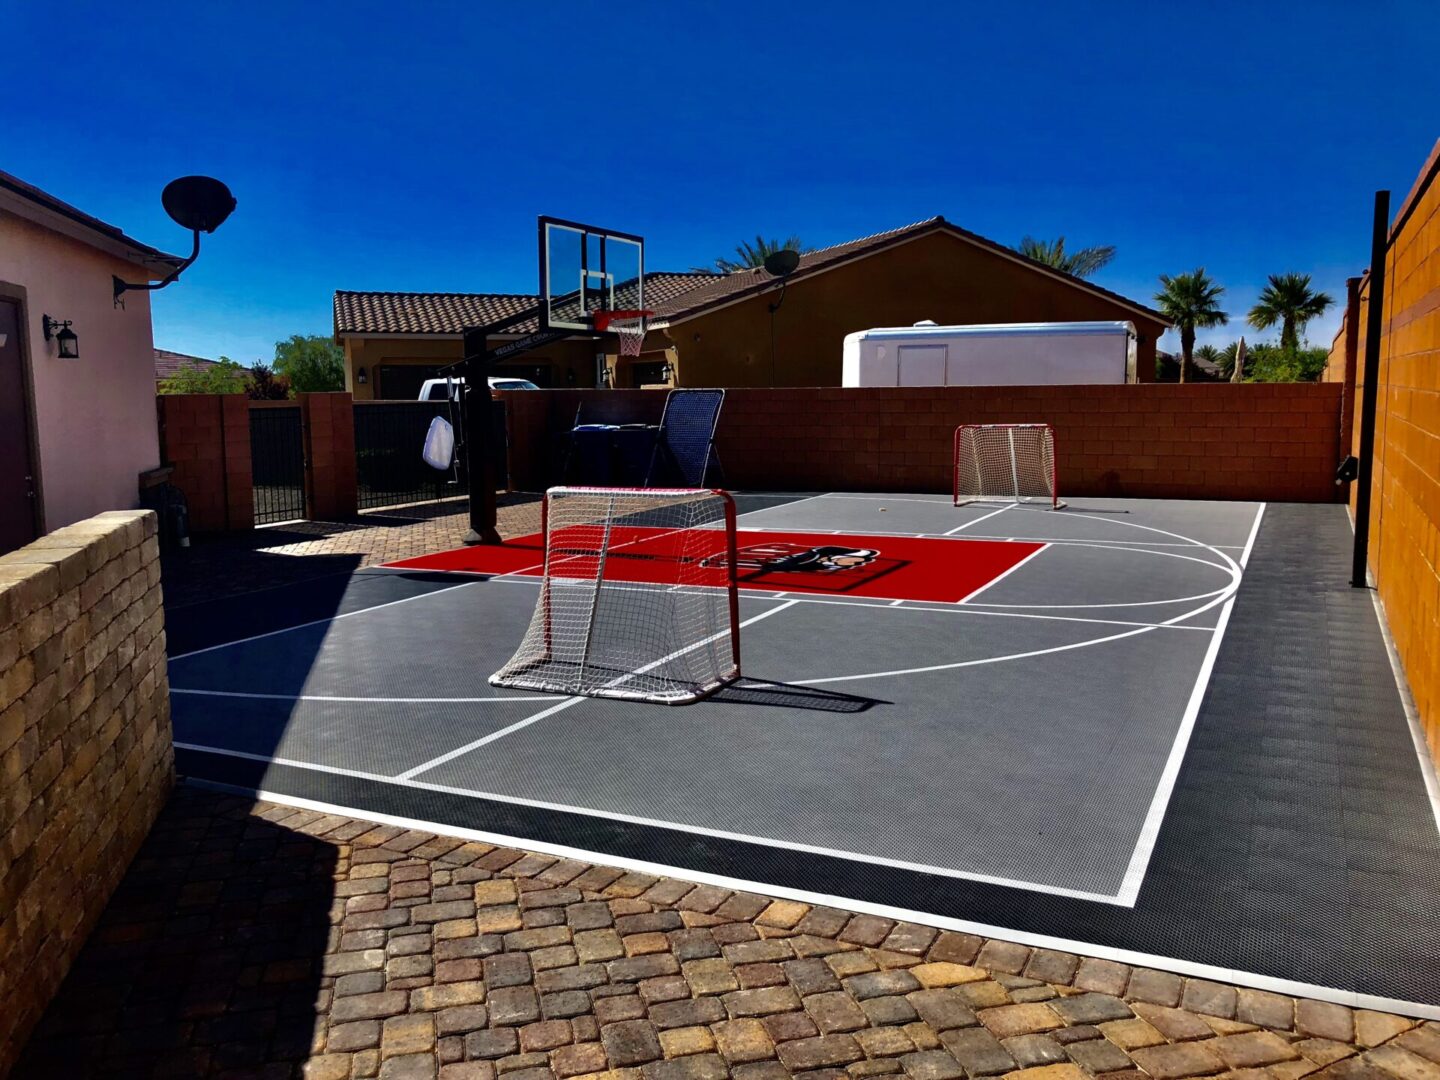 A basketball court with a net and a basket ball hoop.